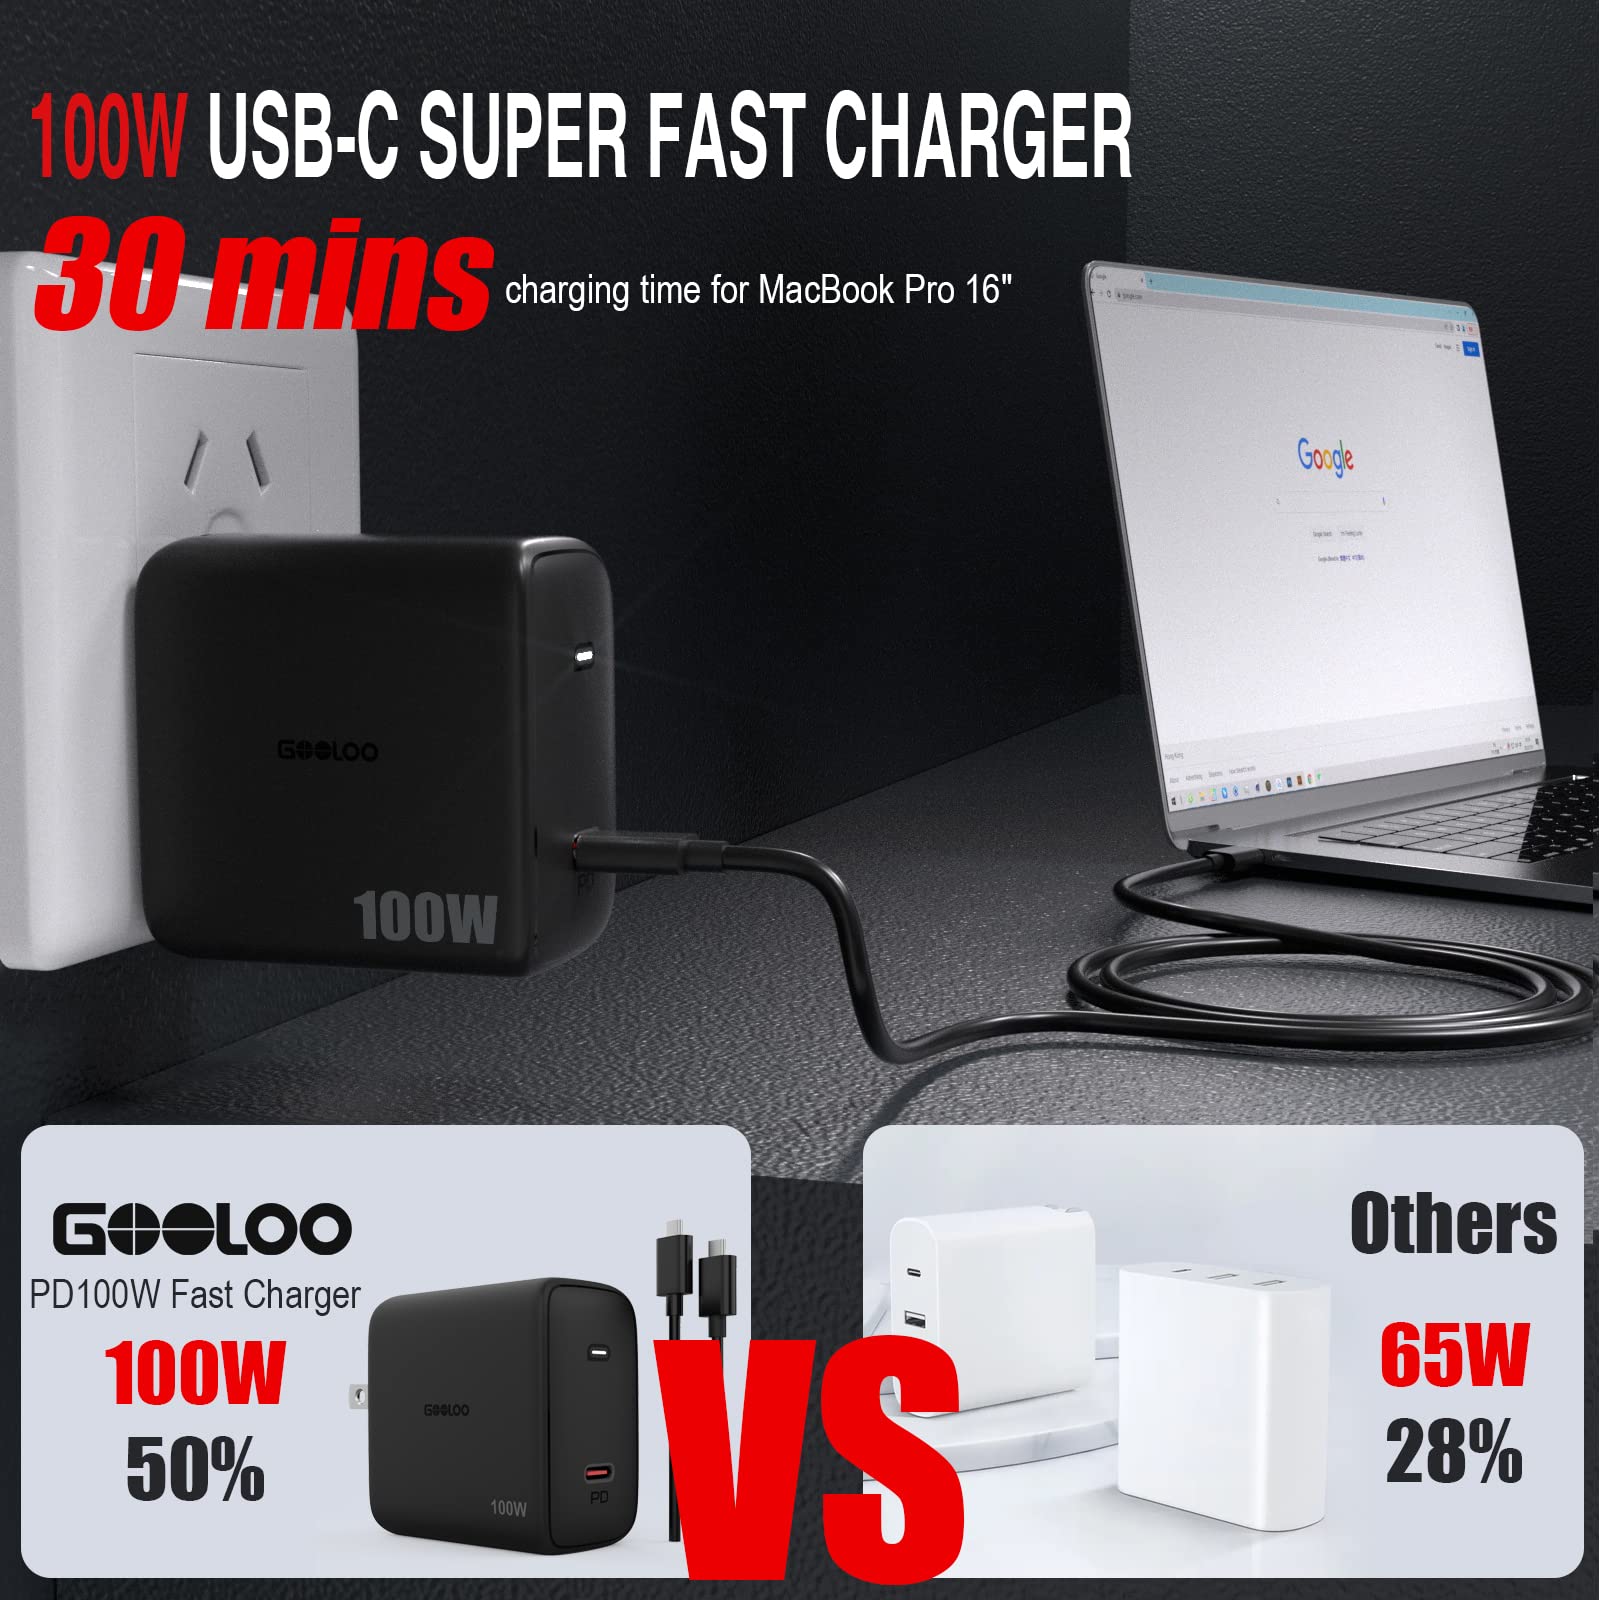 GOOLOO 100W Fast Charging Wall Charger